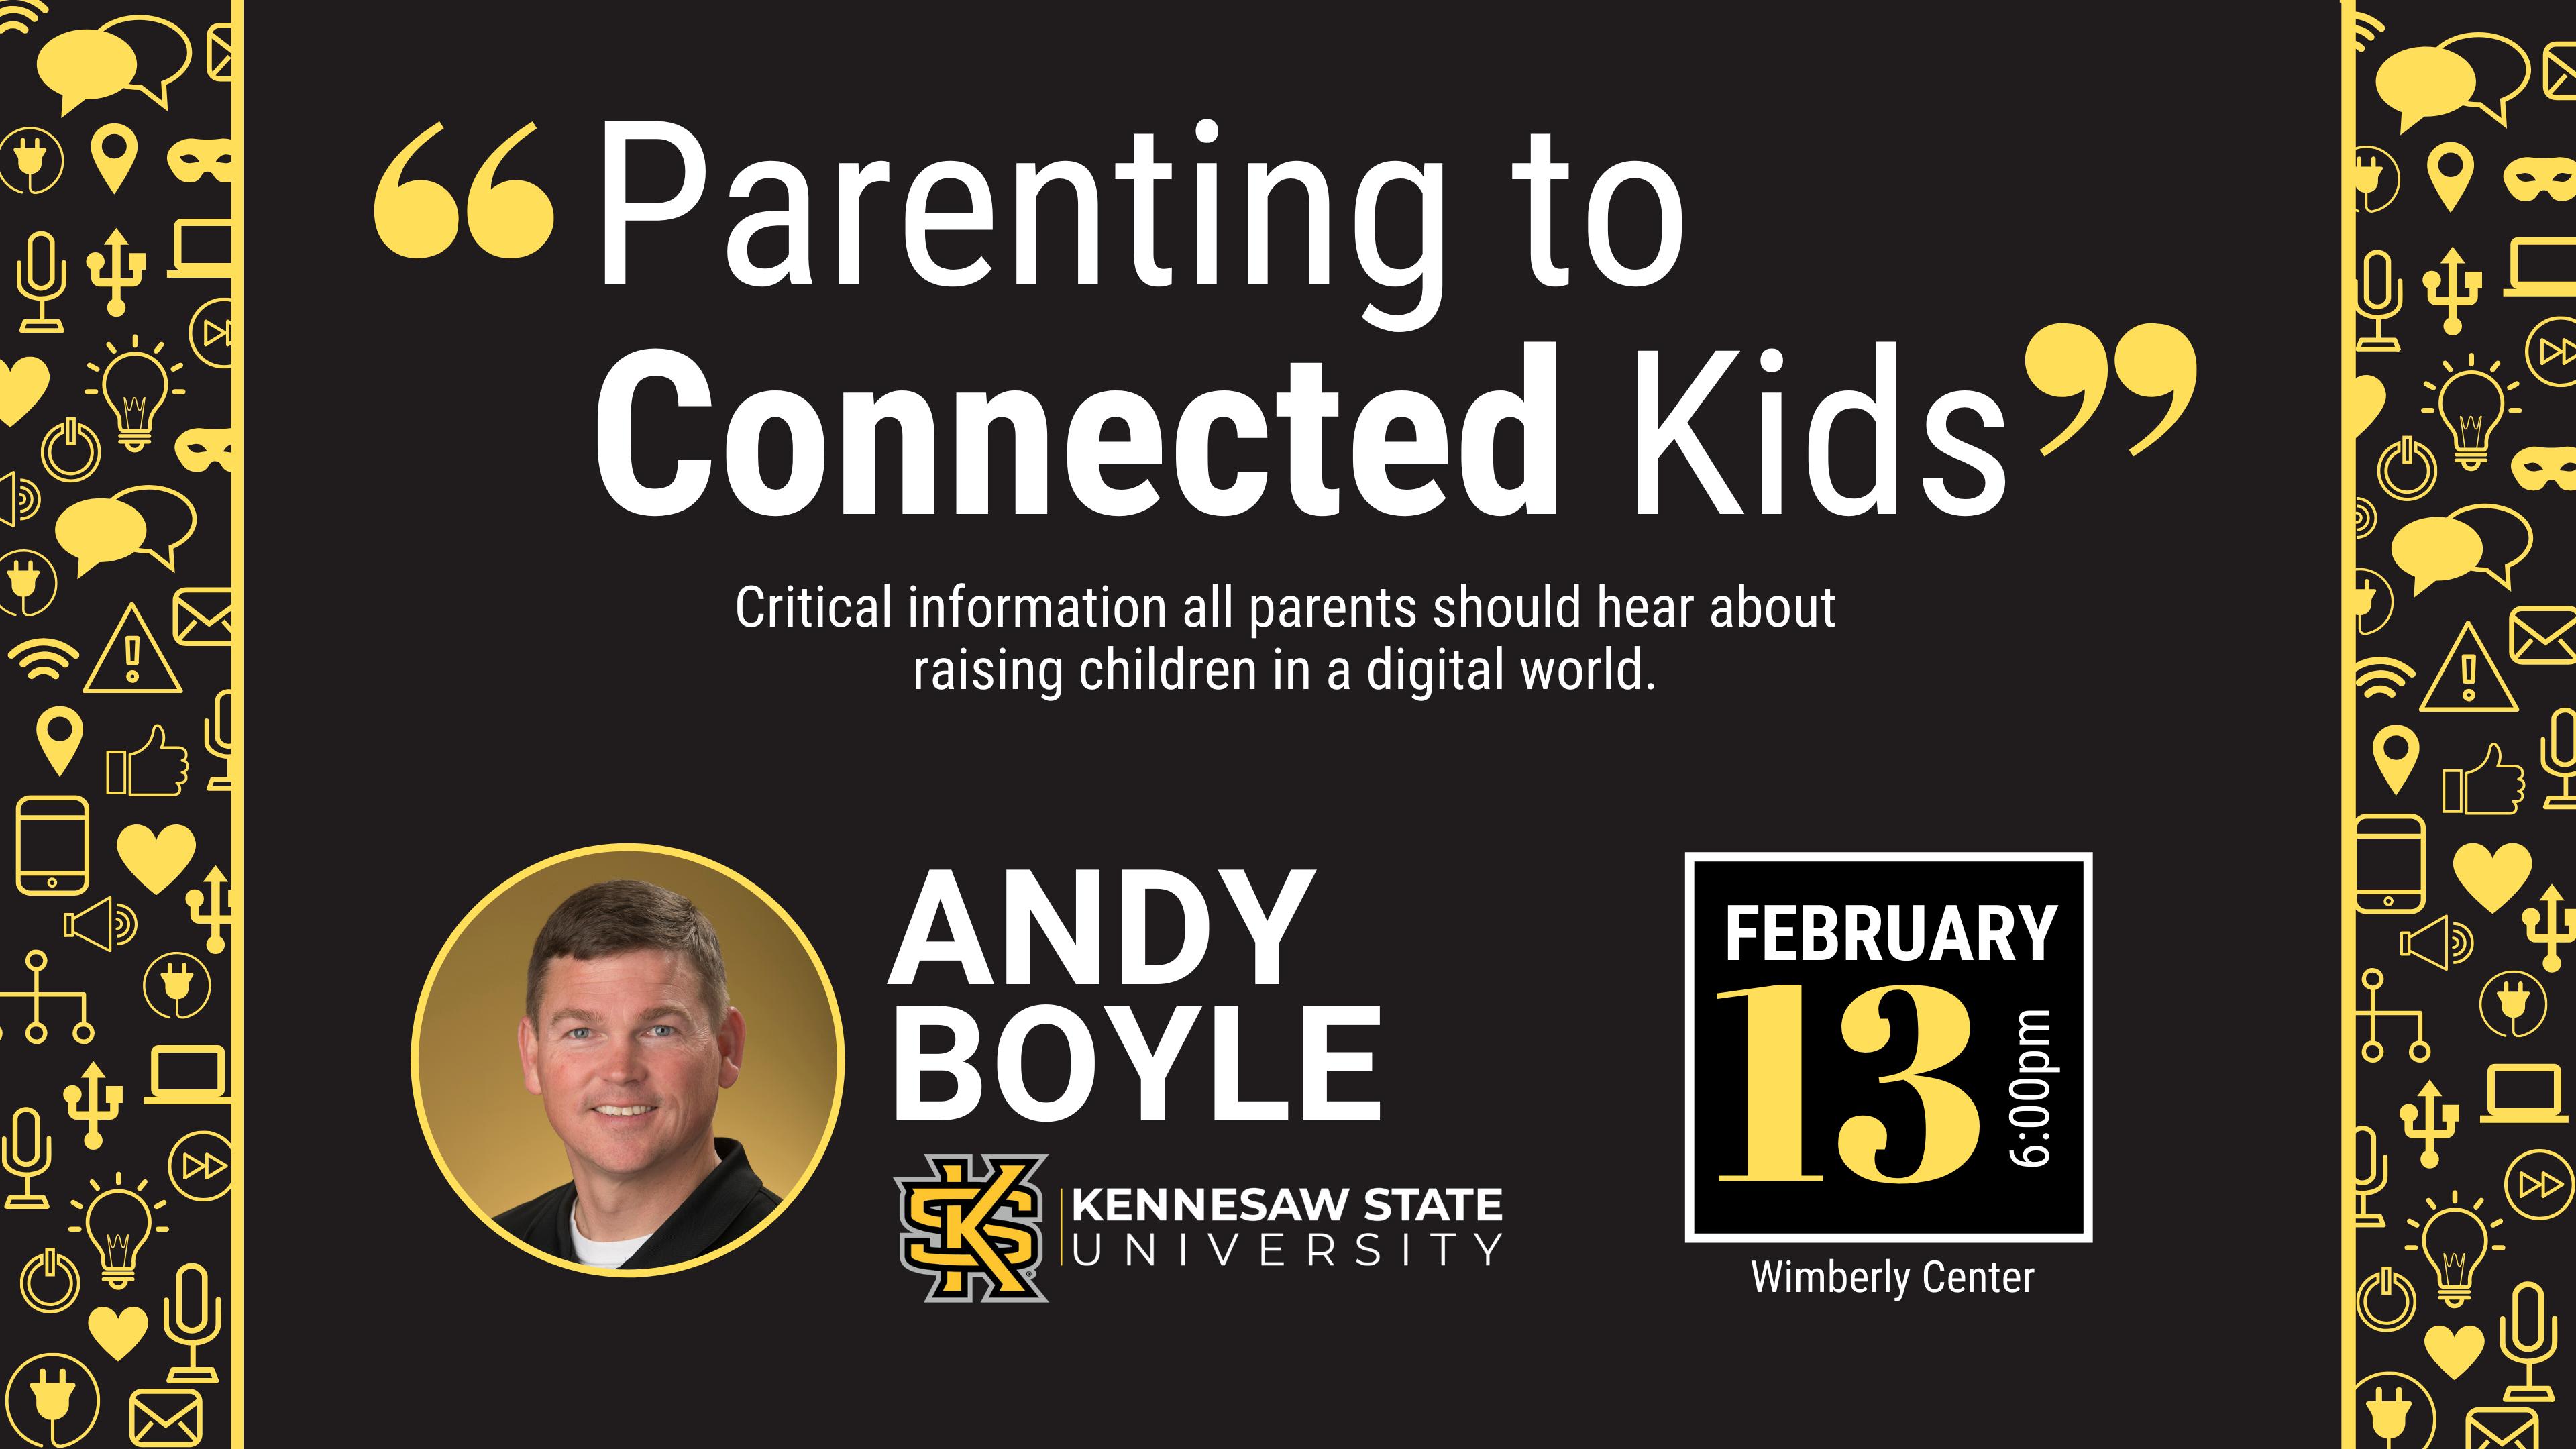 Parenting to Connected Kids - Andy Boyle